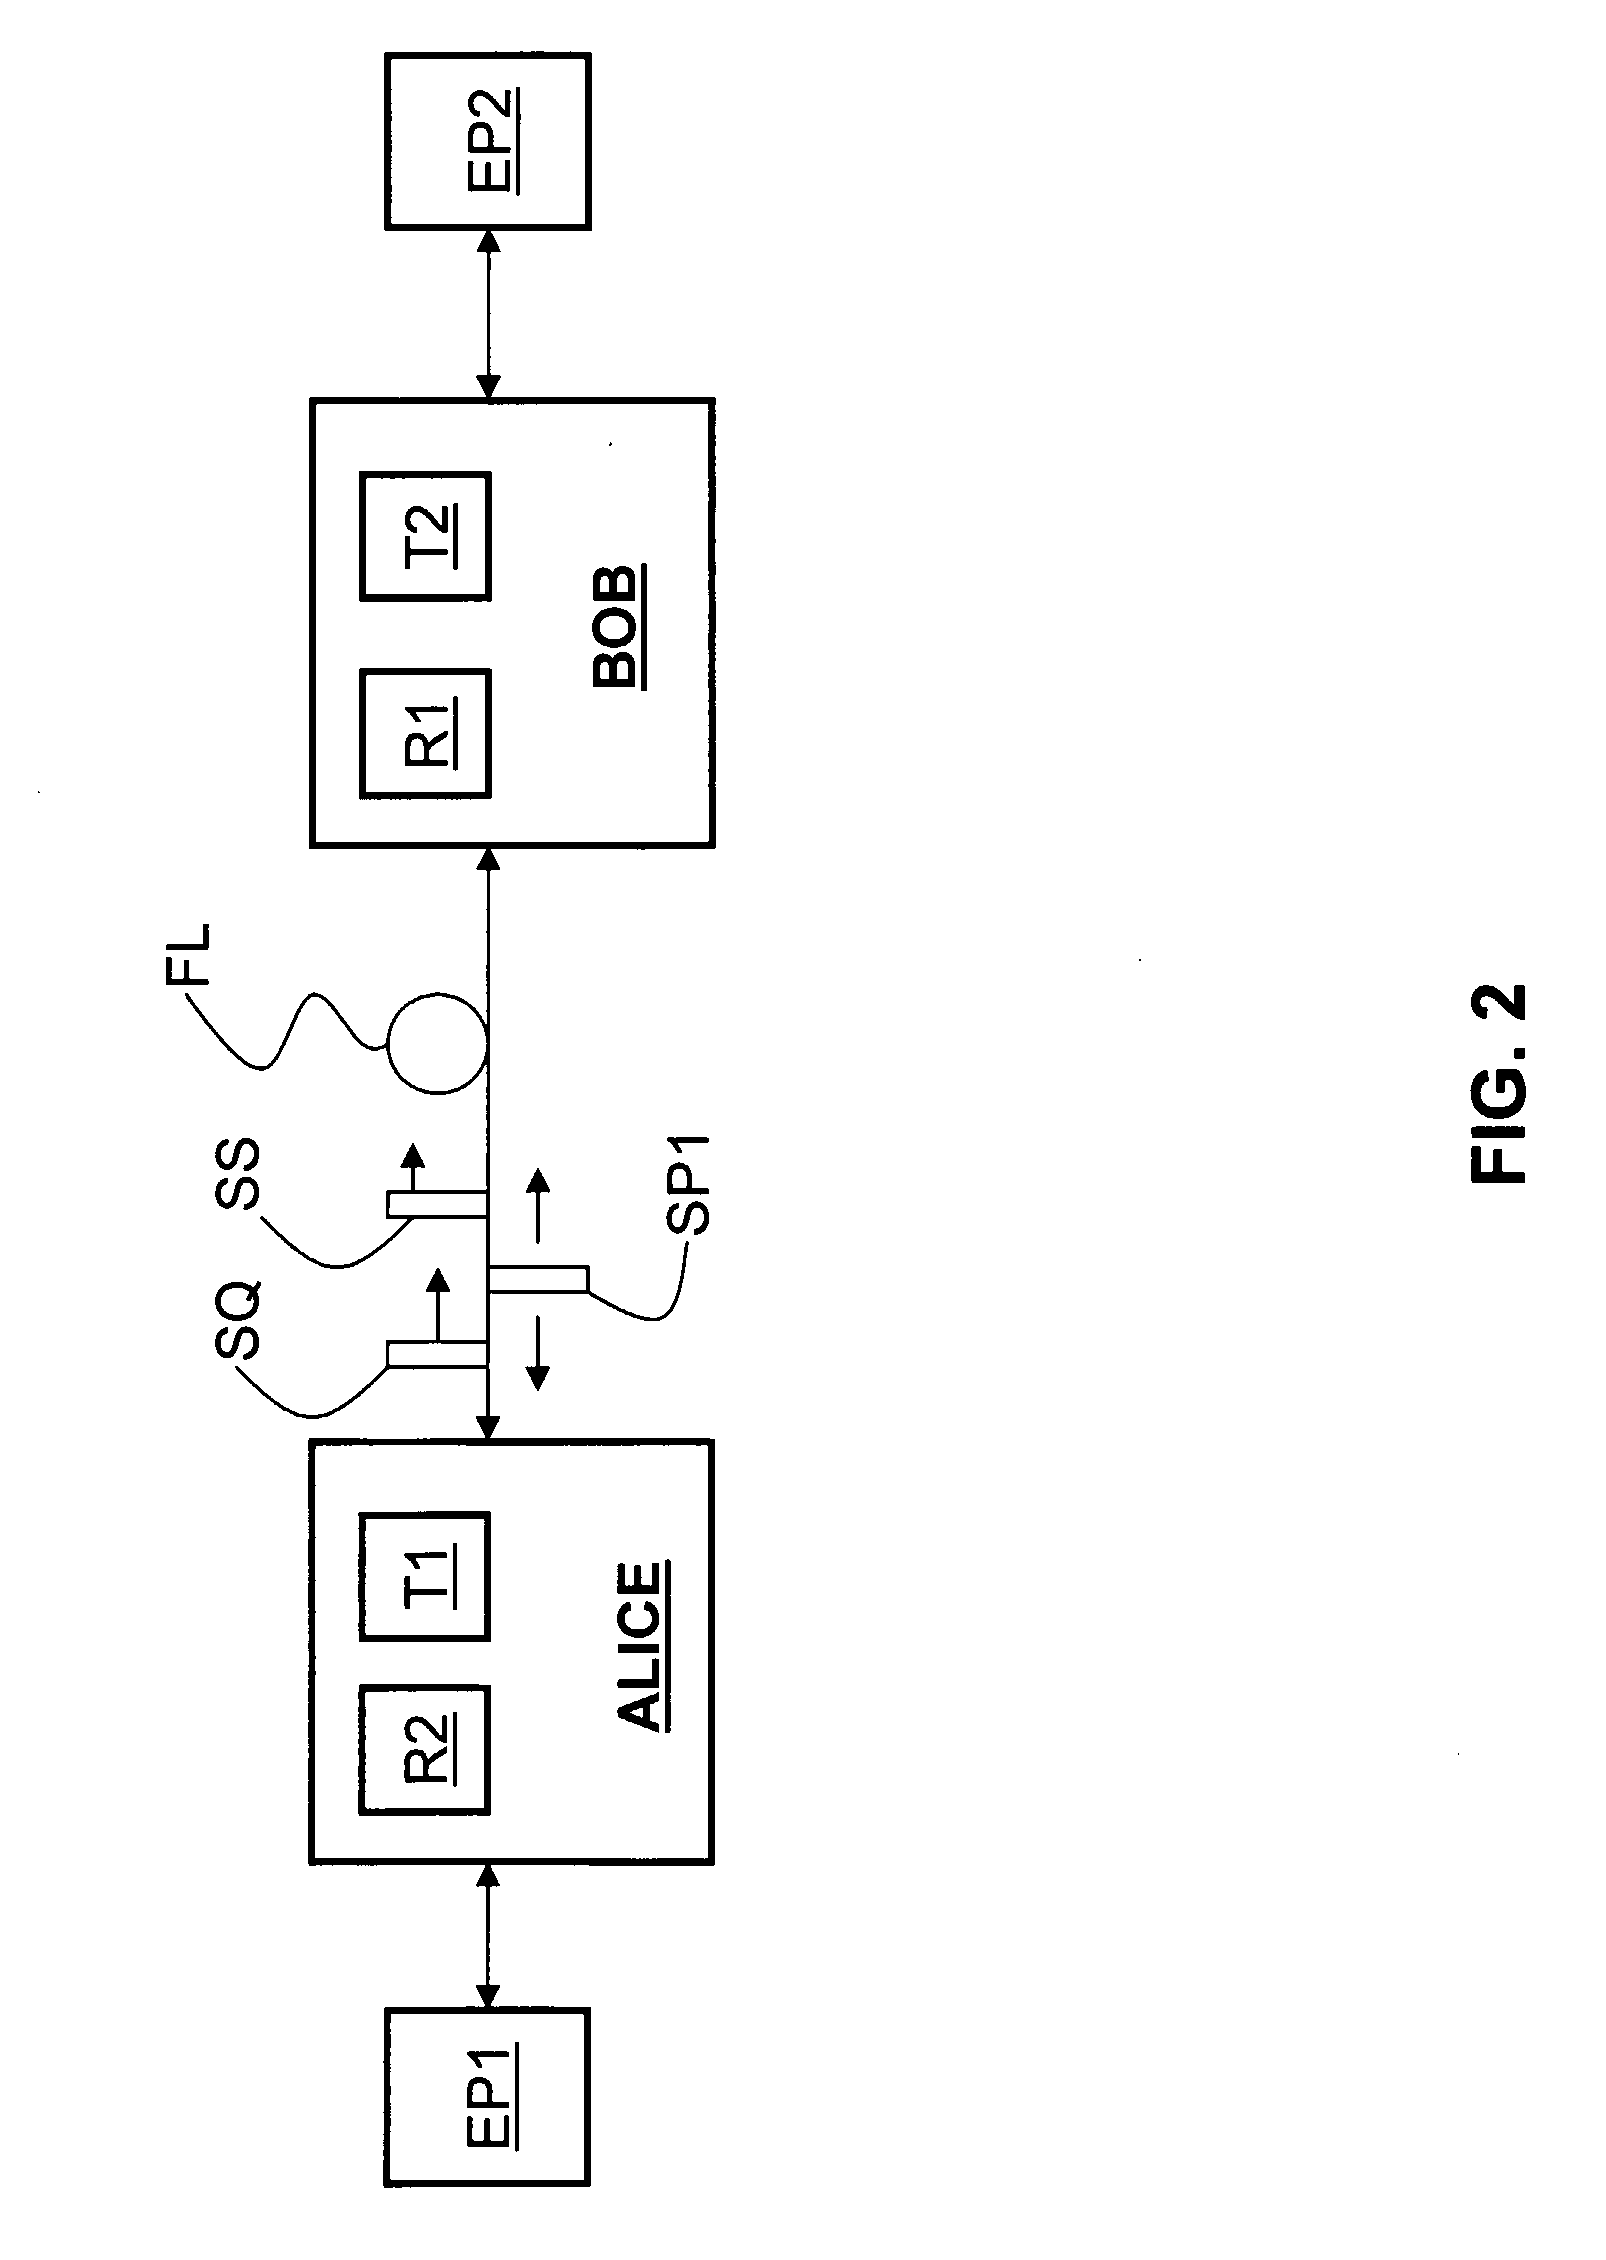 Systems and Methods for Multiplexing Qkd Channels